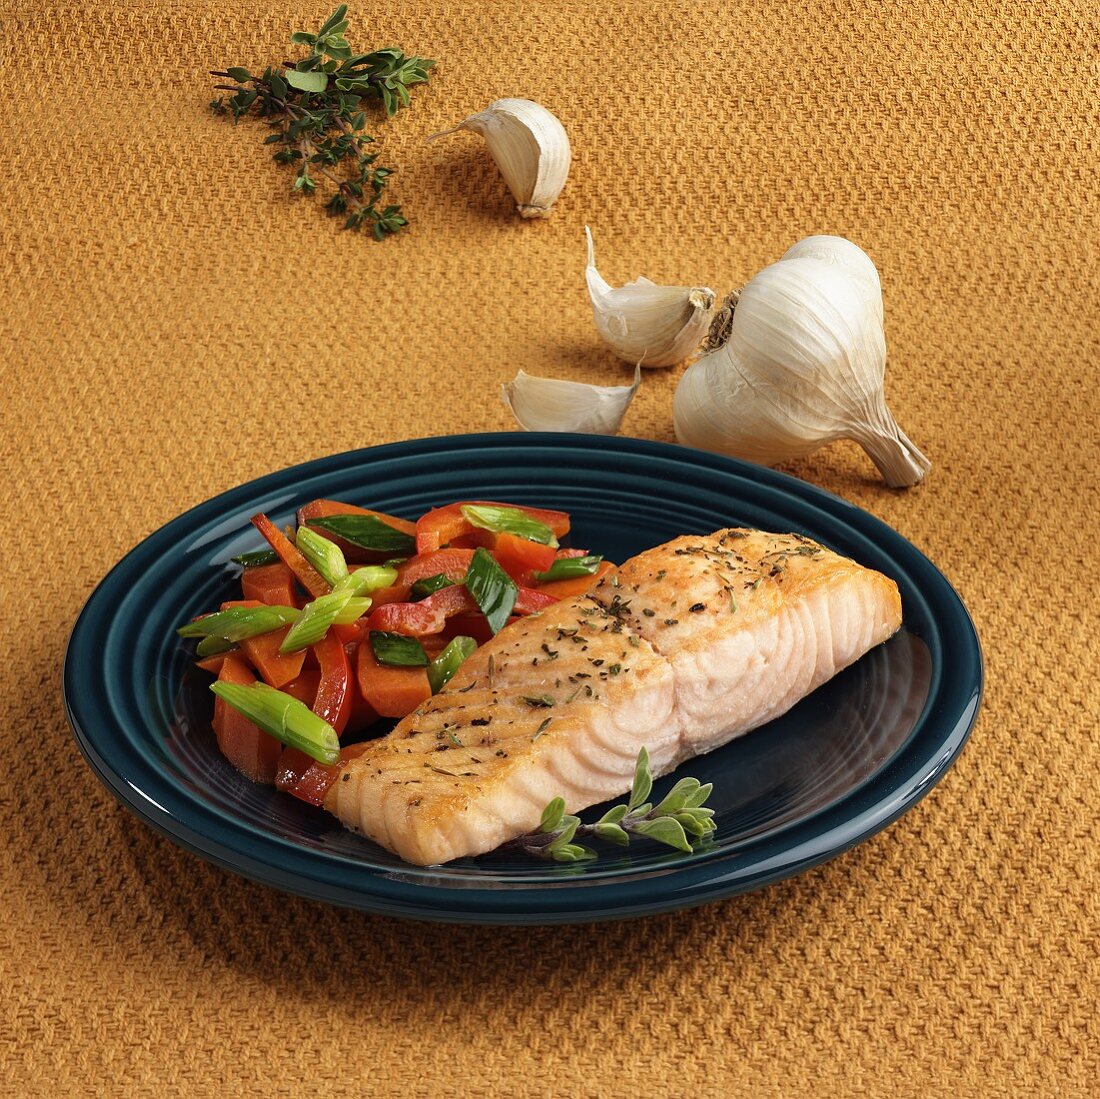 Salmon fillet with peppers and spring onions